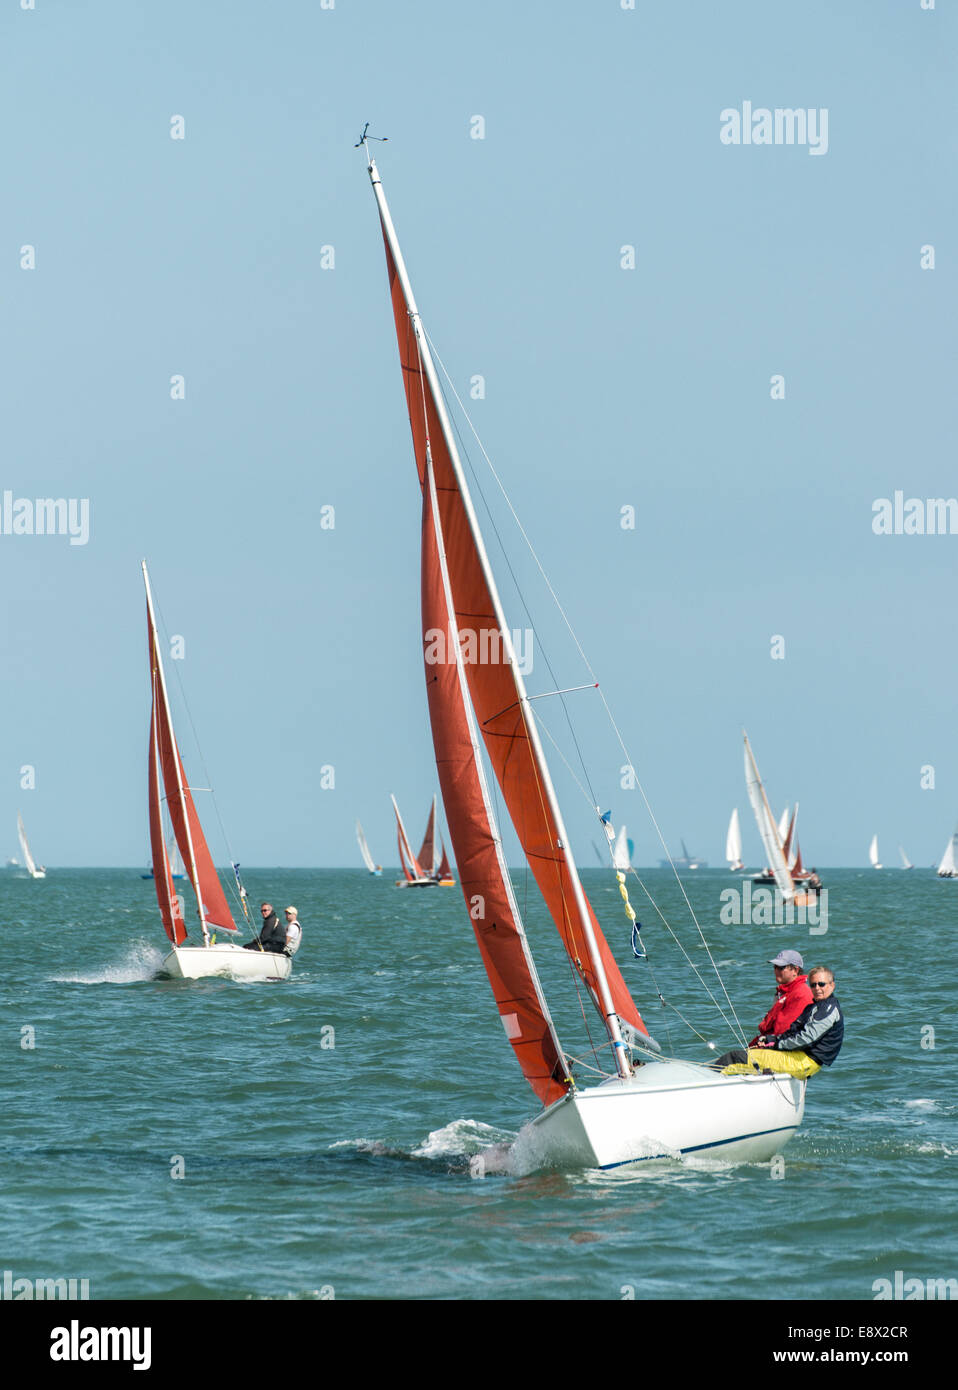 Dinghy Racing in the Solent during the Cowes Week Regatta Stock Photo